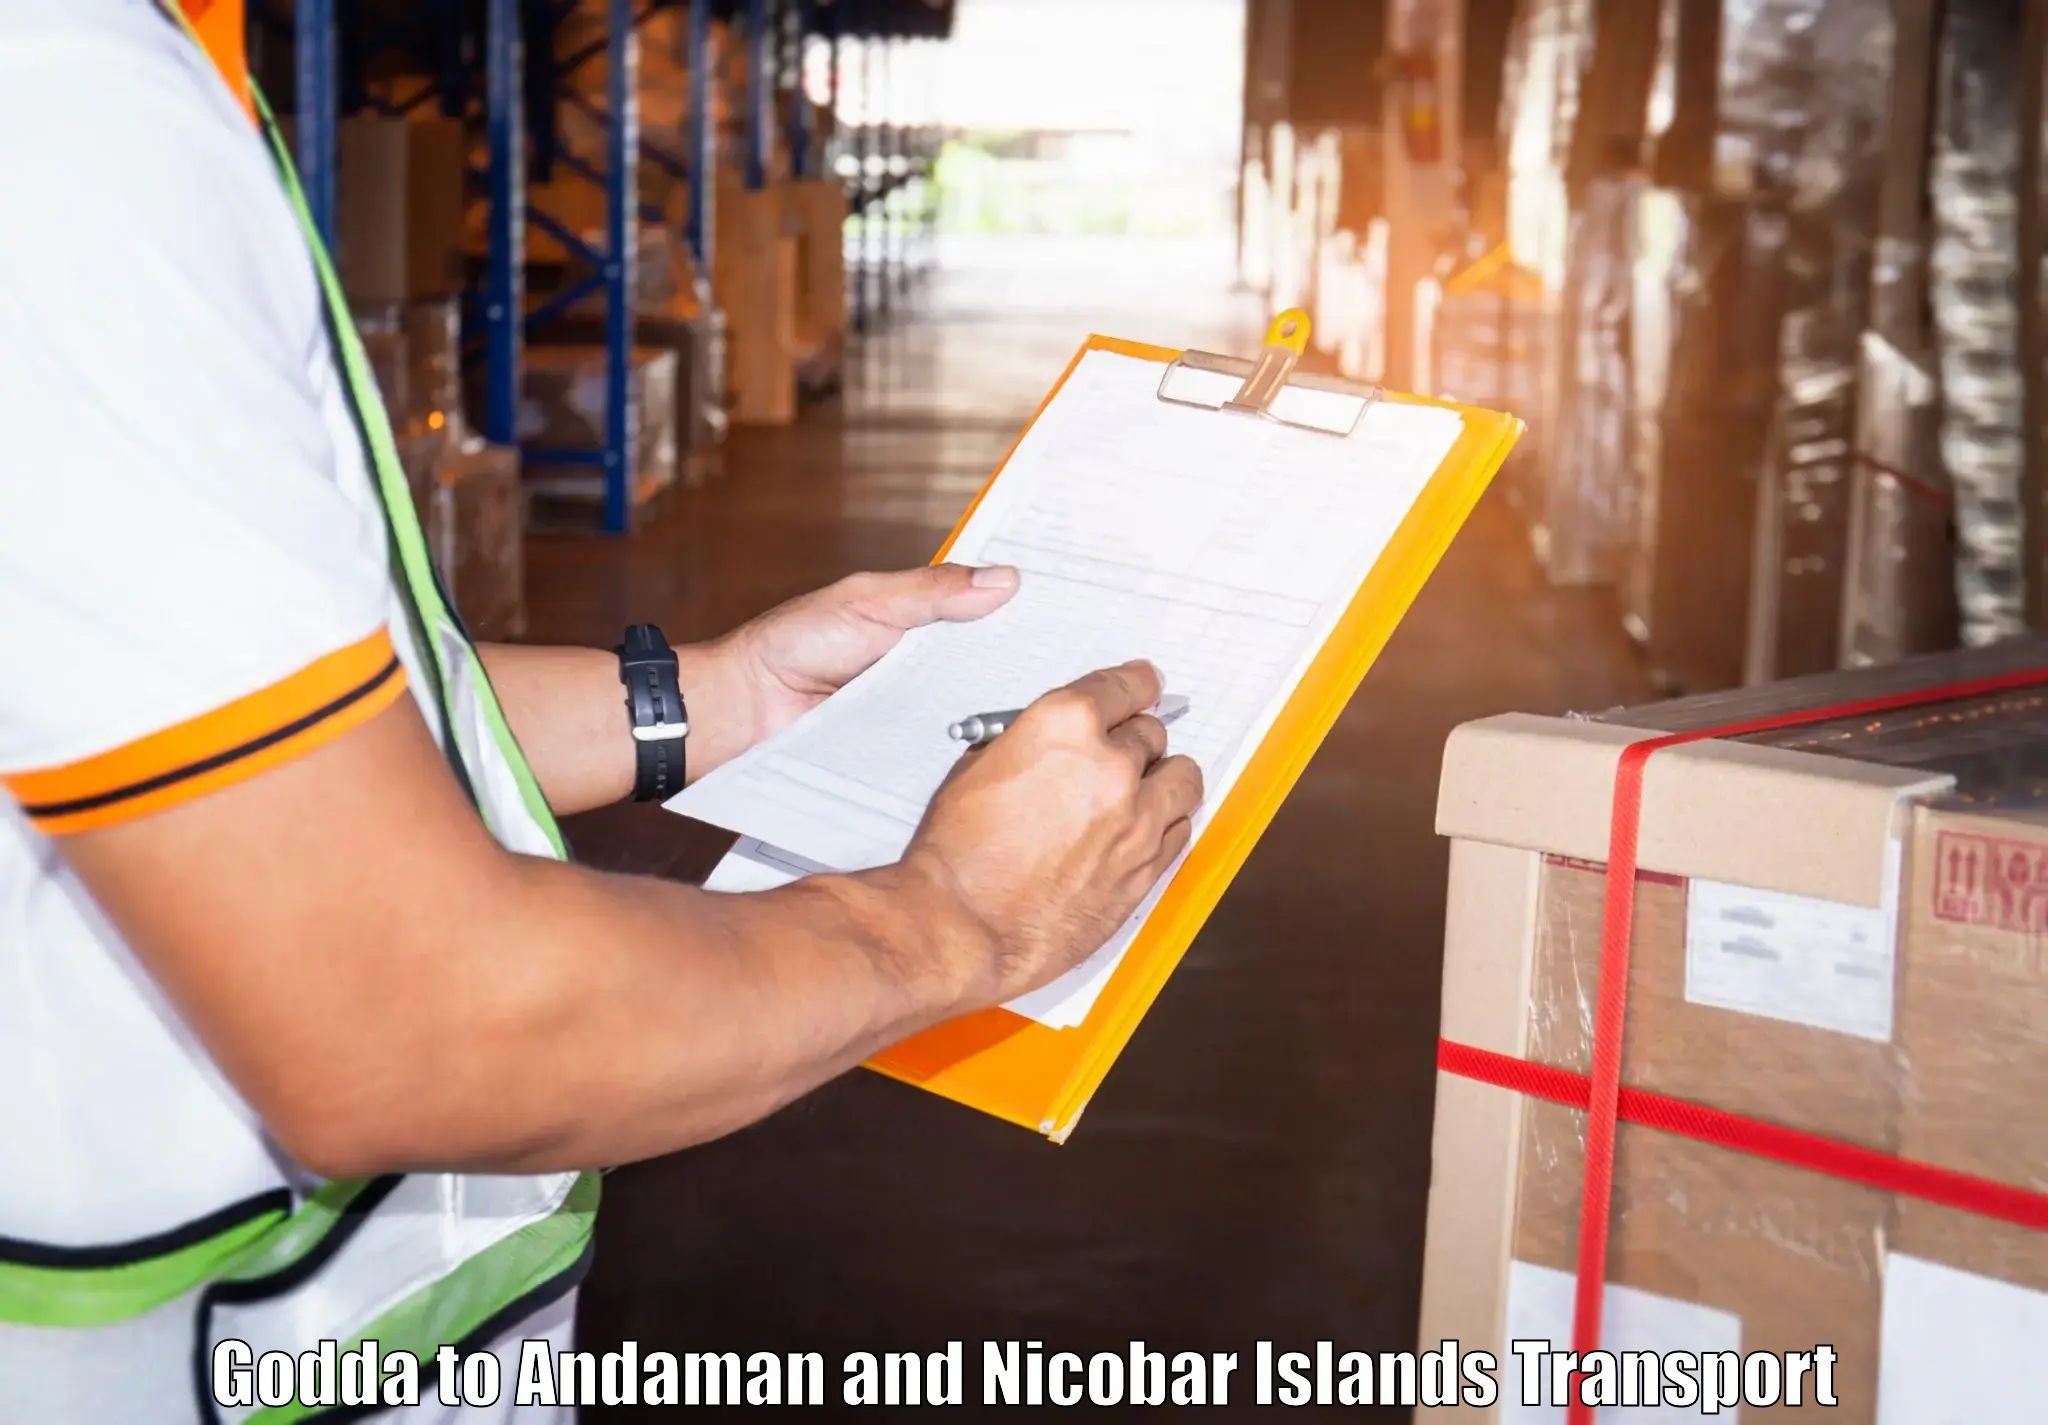 India truck logistics services Godda to North And Middle Andaman